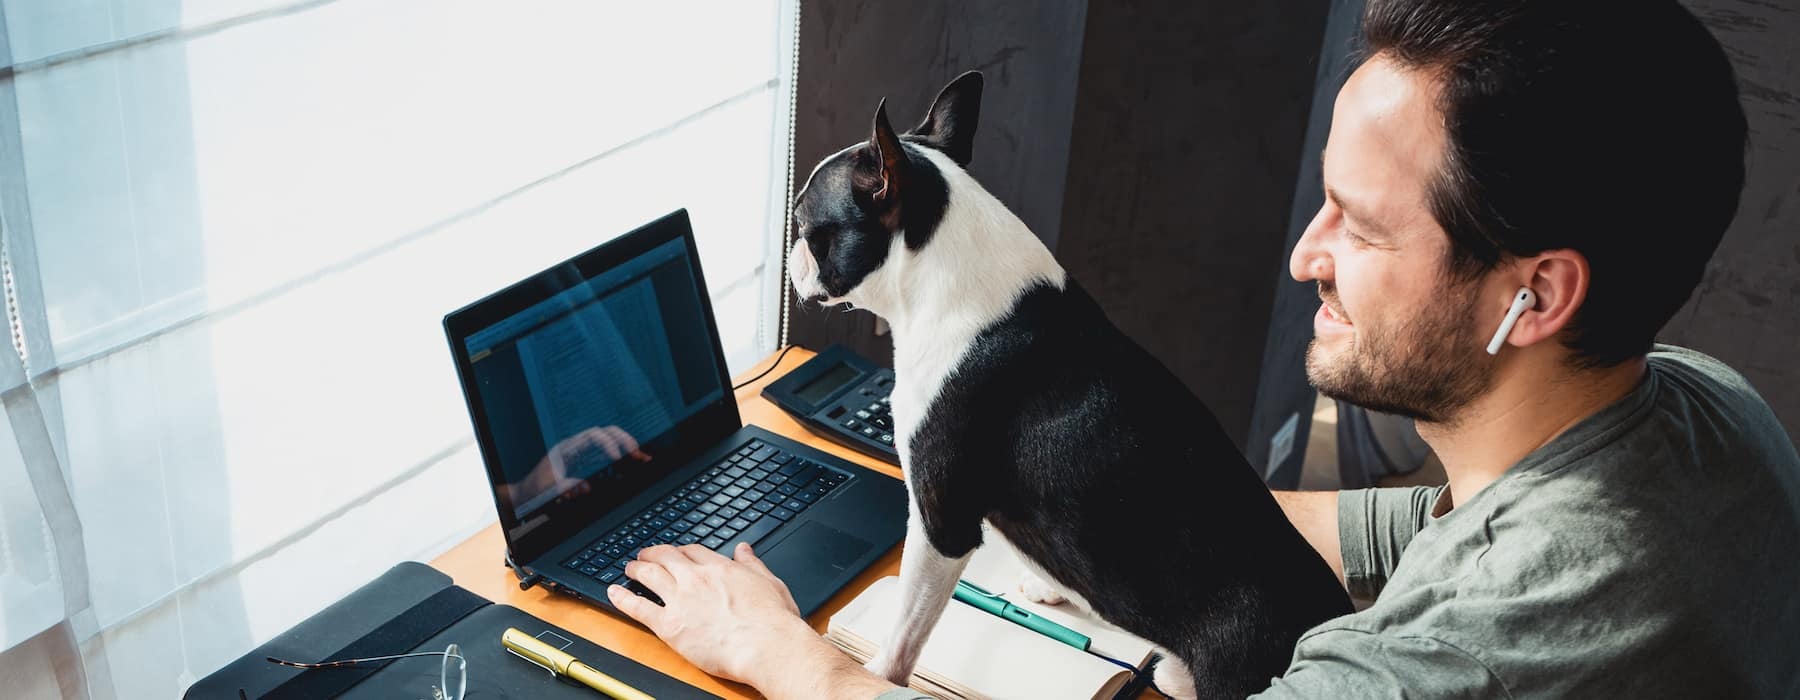 lifestyle image of a man working on his laptop with a dog in his lap